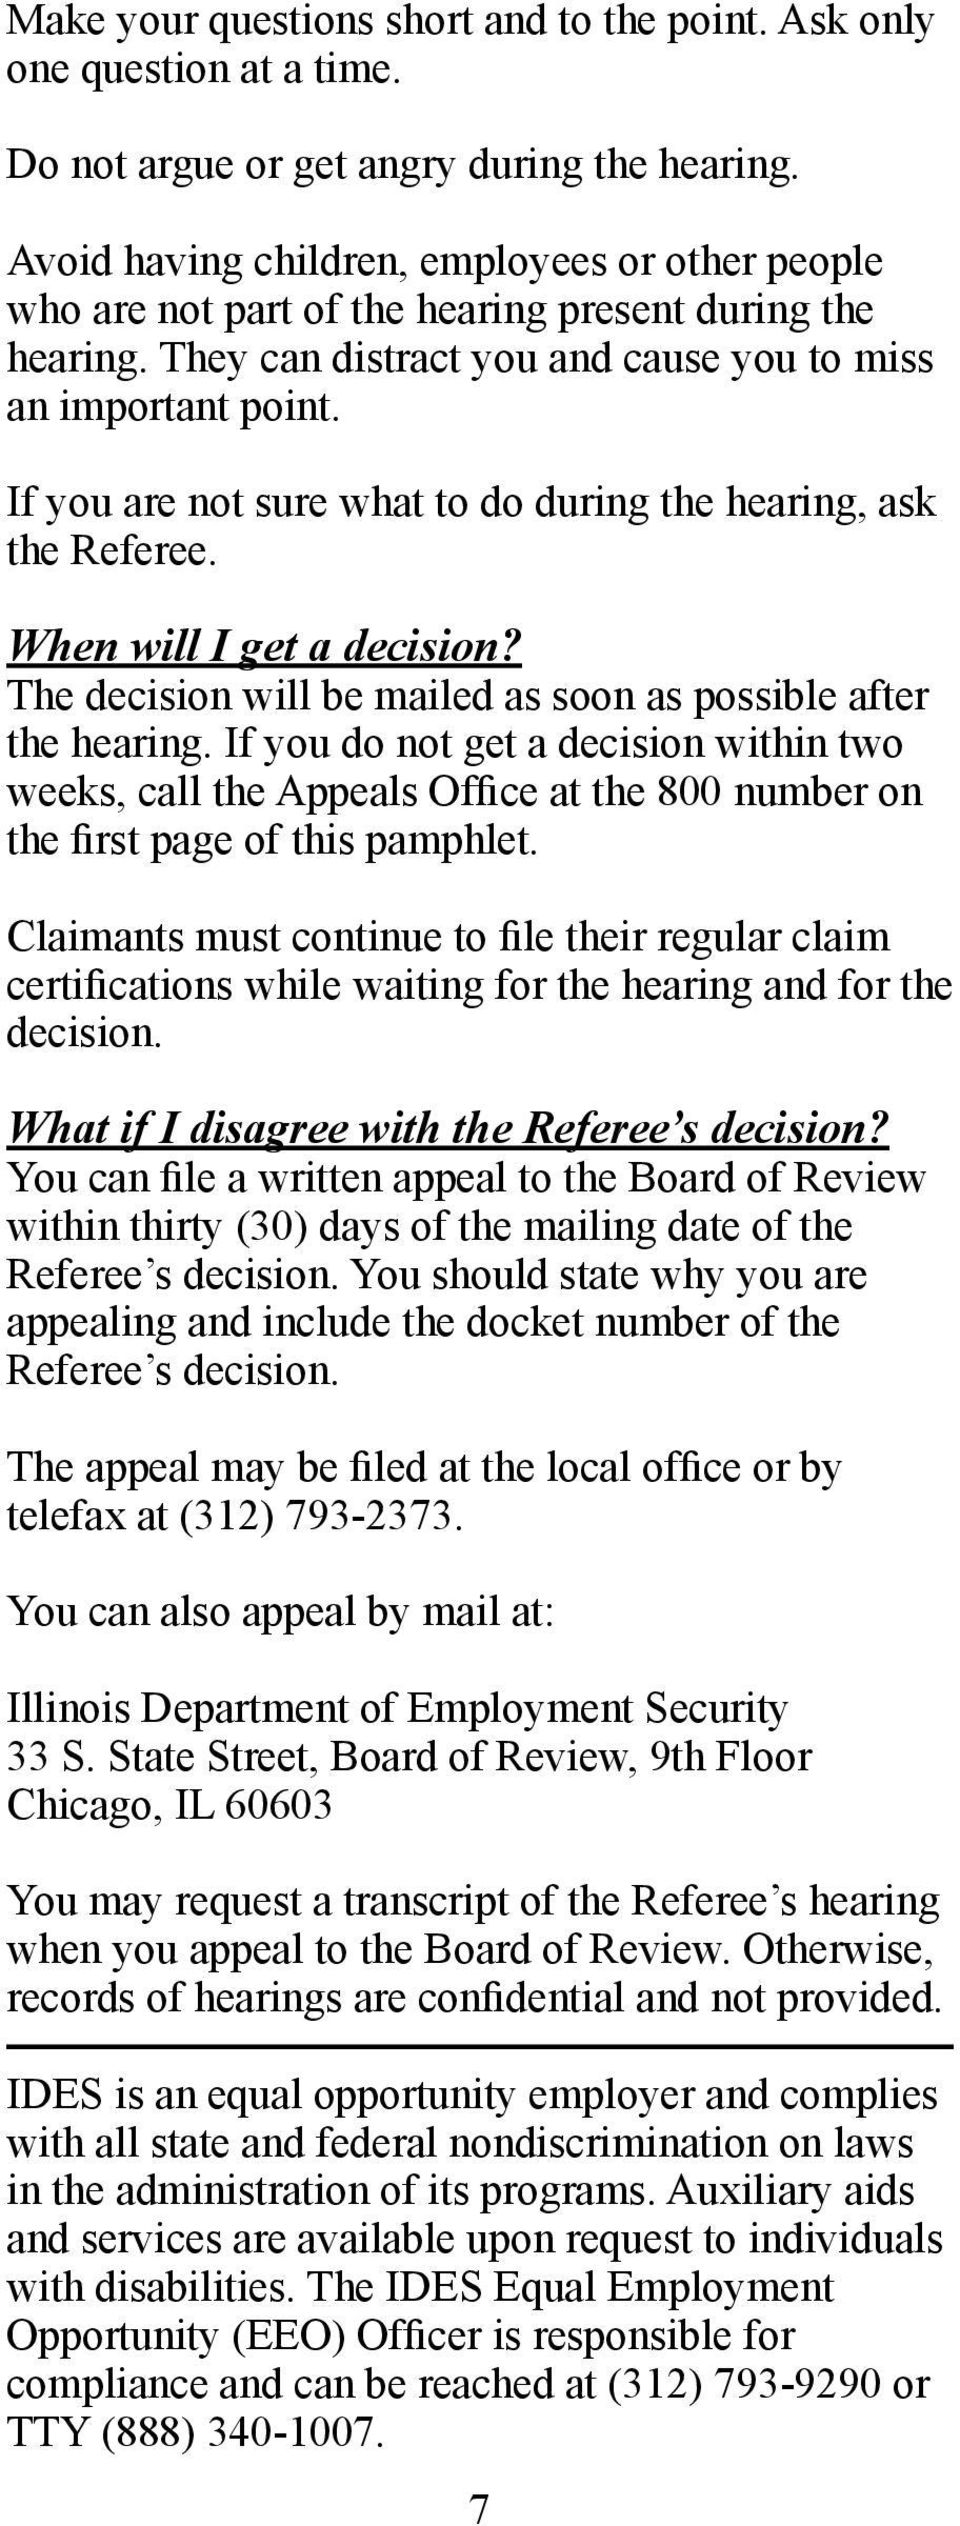 If you are not sure what to do during the hearing, ask the Referee. When will I get a decision? The decision will be mailed as soon as possible after the hearing.